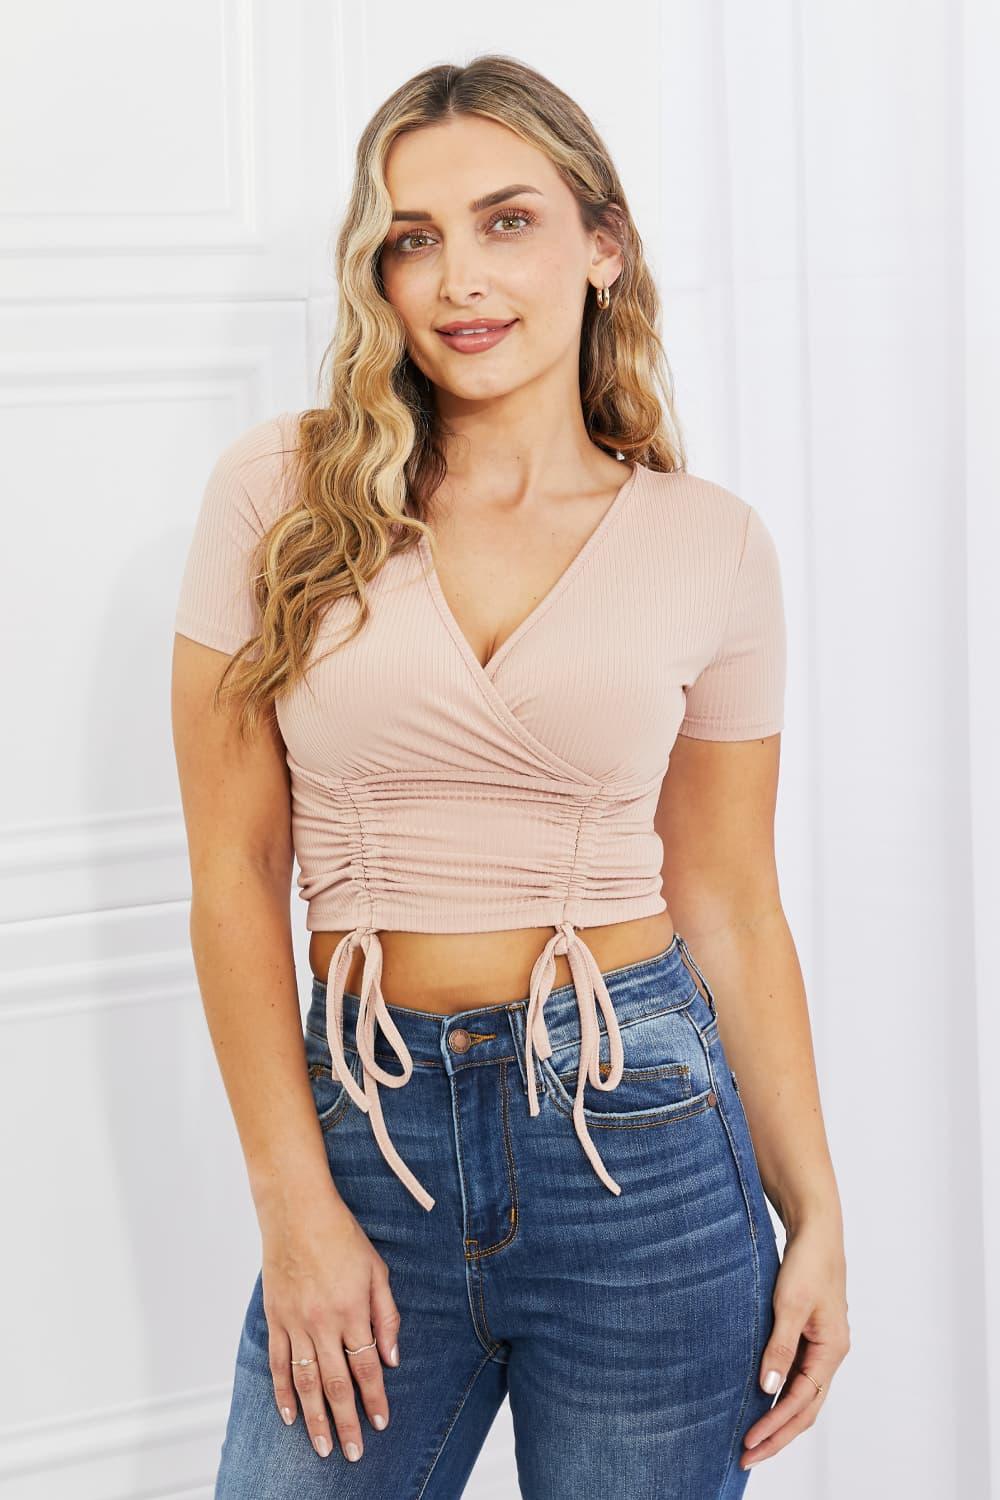 Capella Back To Simple Full Size Ribbed Front Scrunched Top in Blush - Glamorous Boutique USA L.L.C.